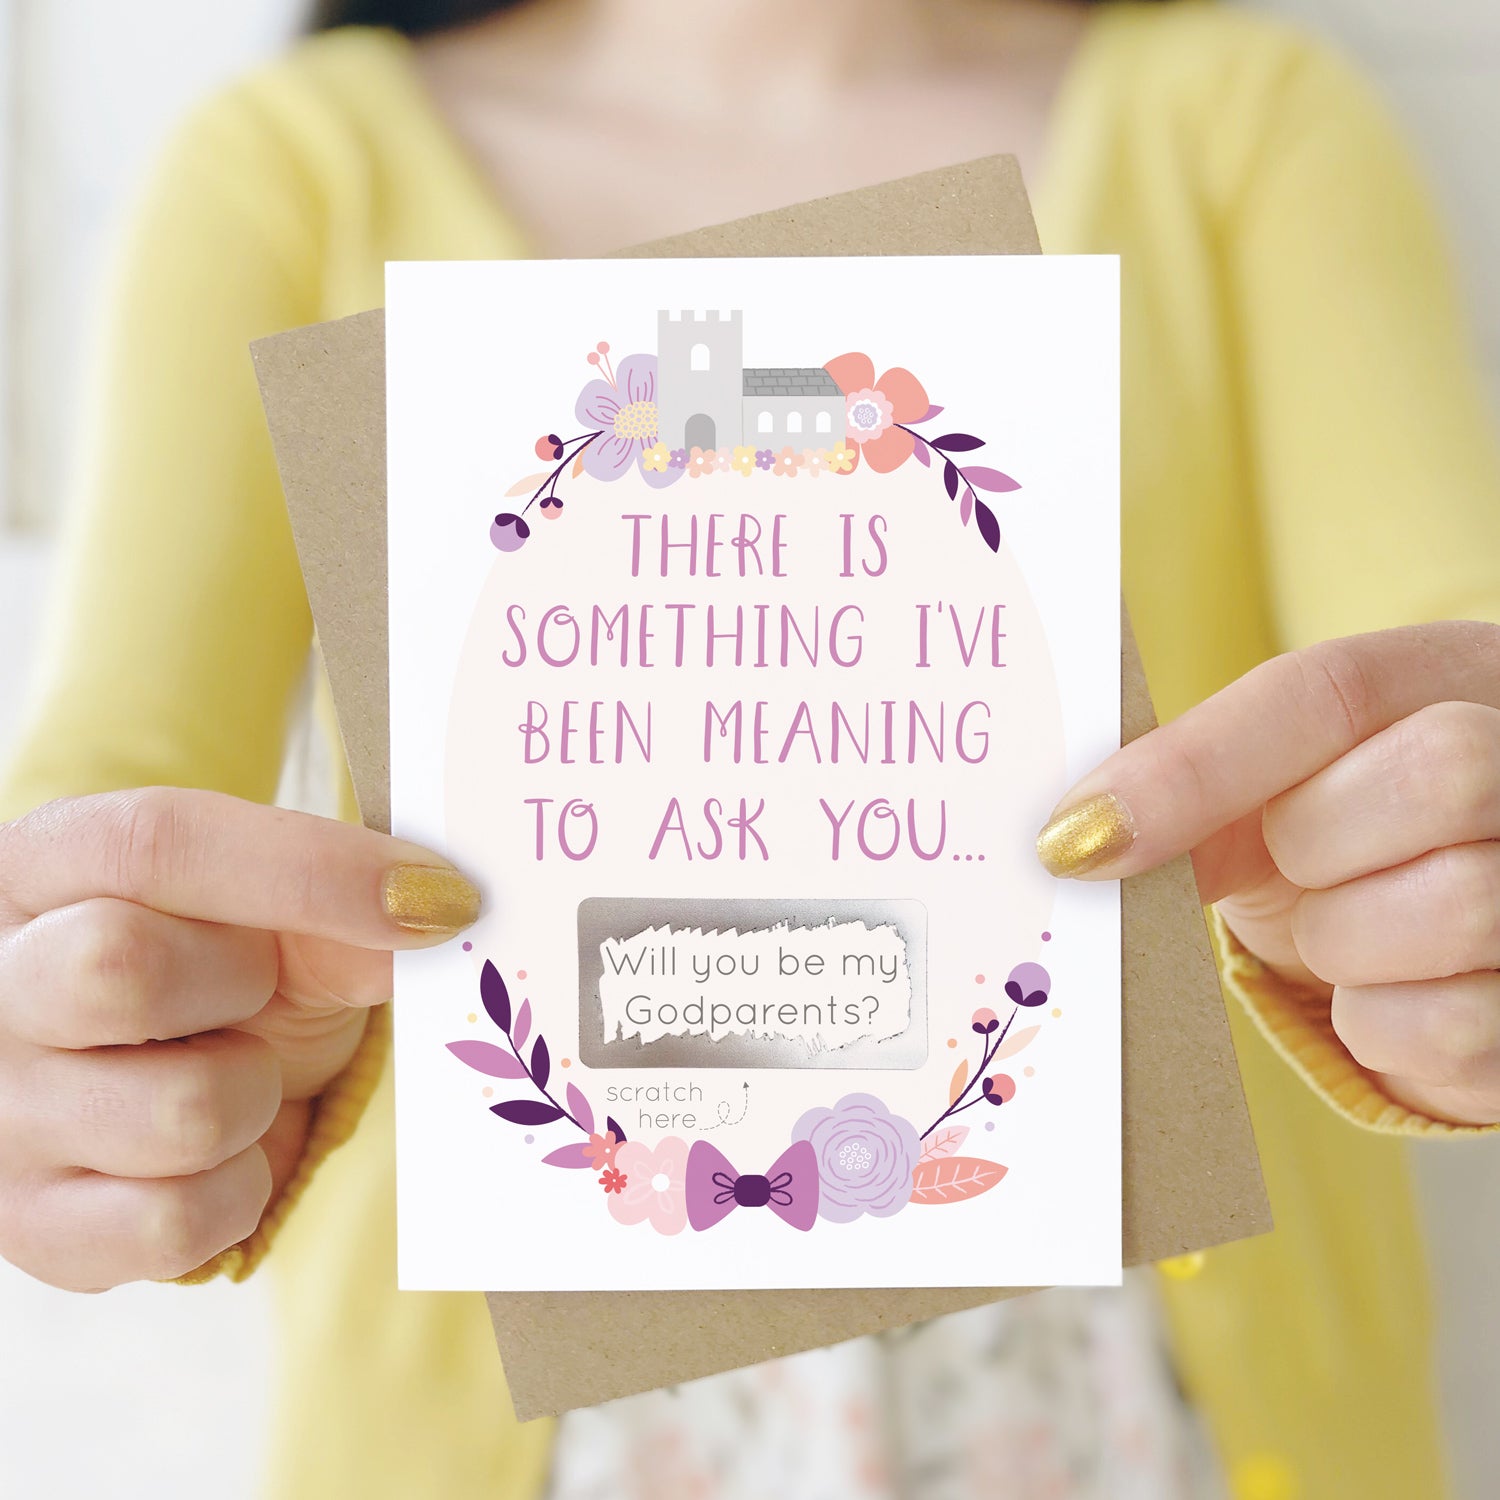 A will you be my godparents scratch and reveal card being held in front of a white dress and yellow cardigan. The design features a church, simple florals and a scratch off panel in silver. This is the purple palette.